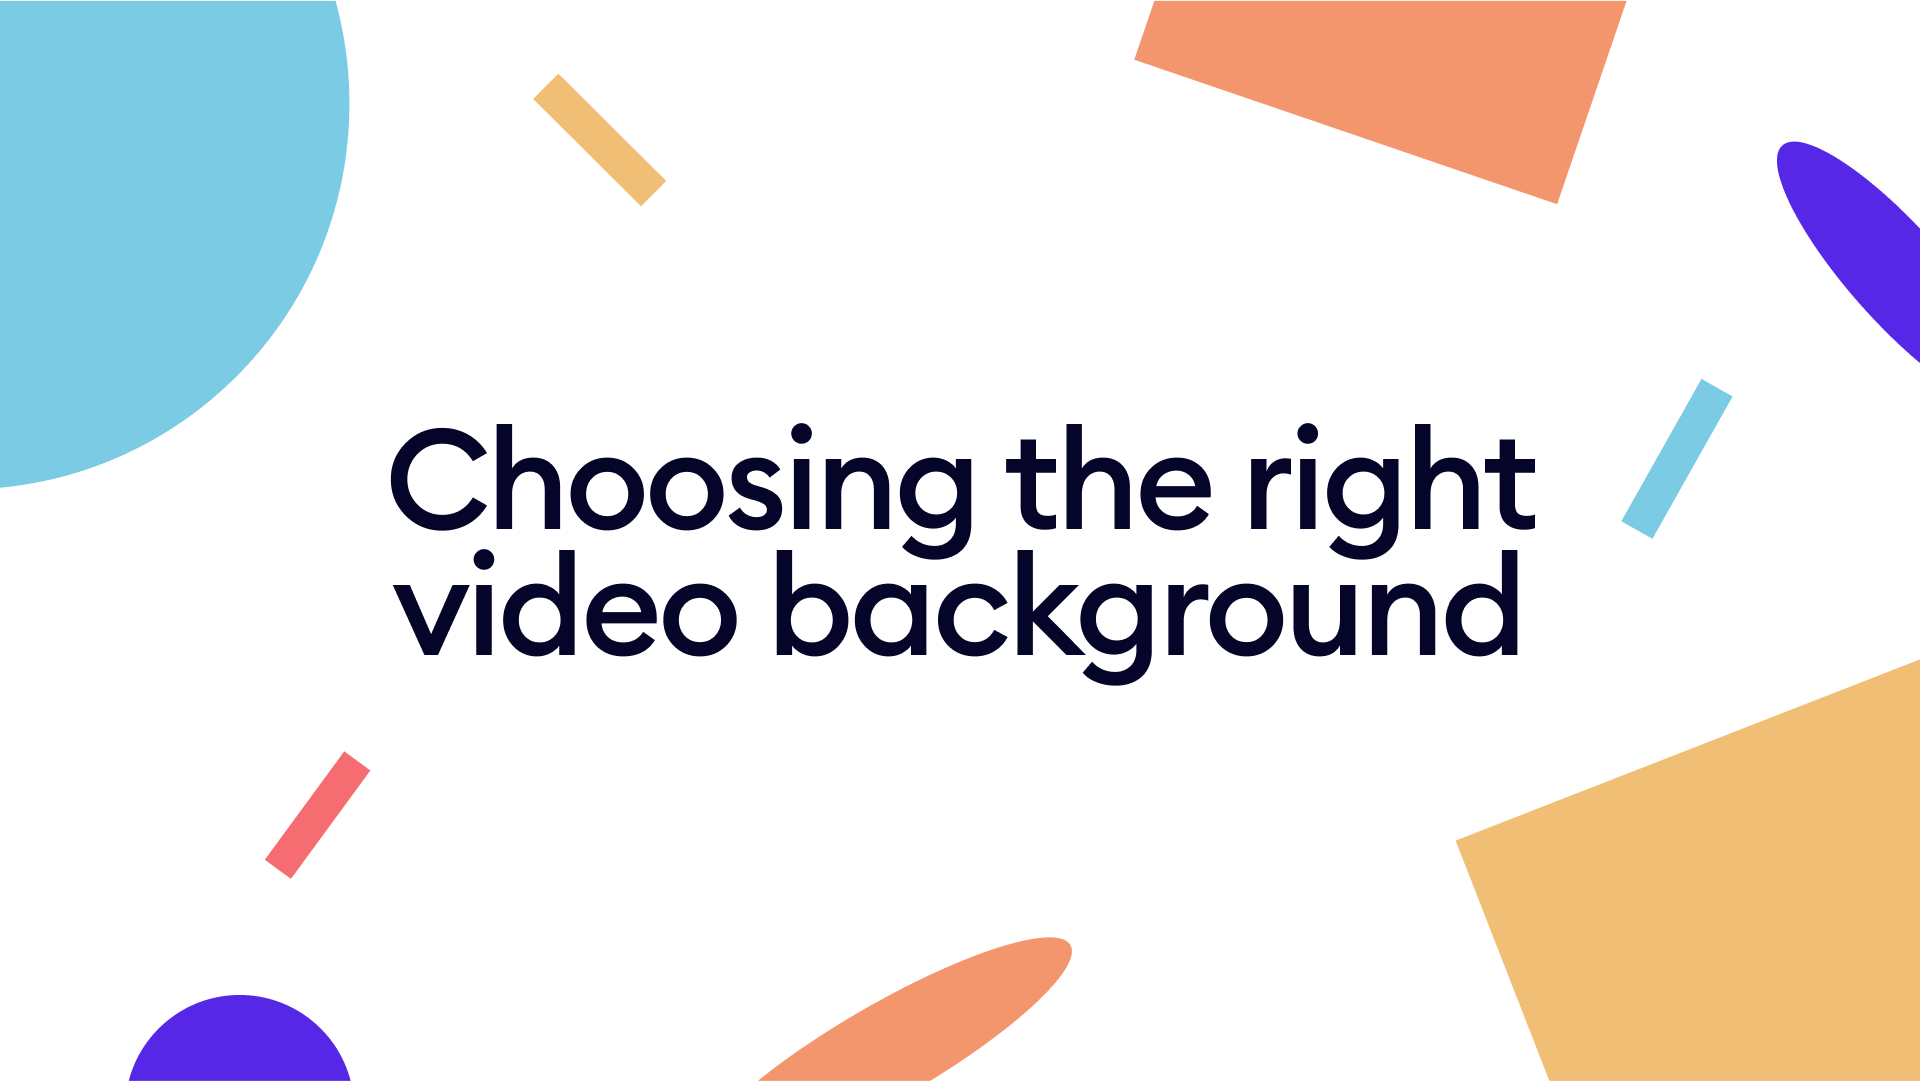 30+ Funny and Useful Video Backgrounds: How to choose wisely